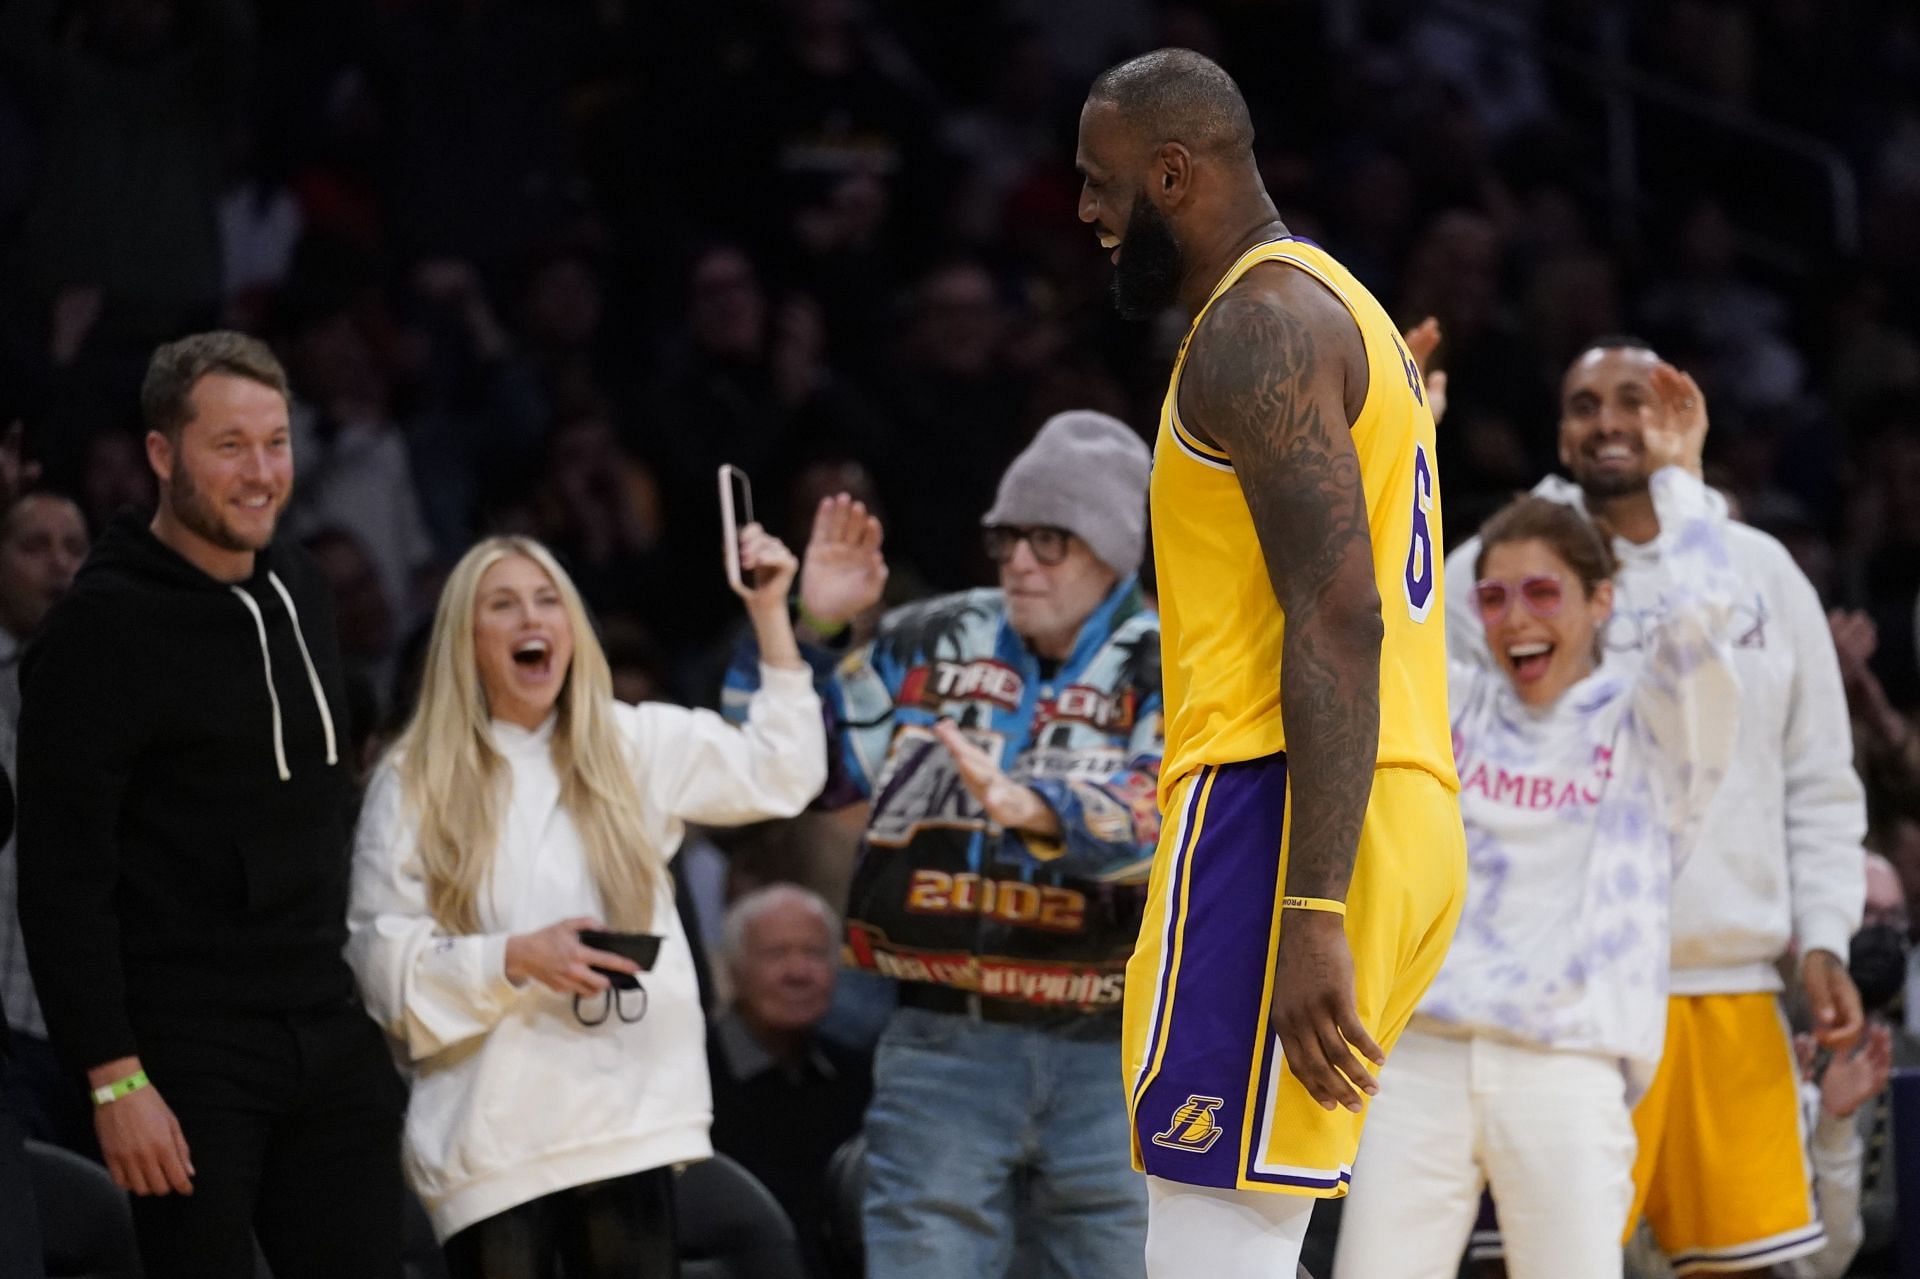 Matthew Stafford courside at last night&#039;s Lakers game with Lebron James